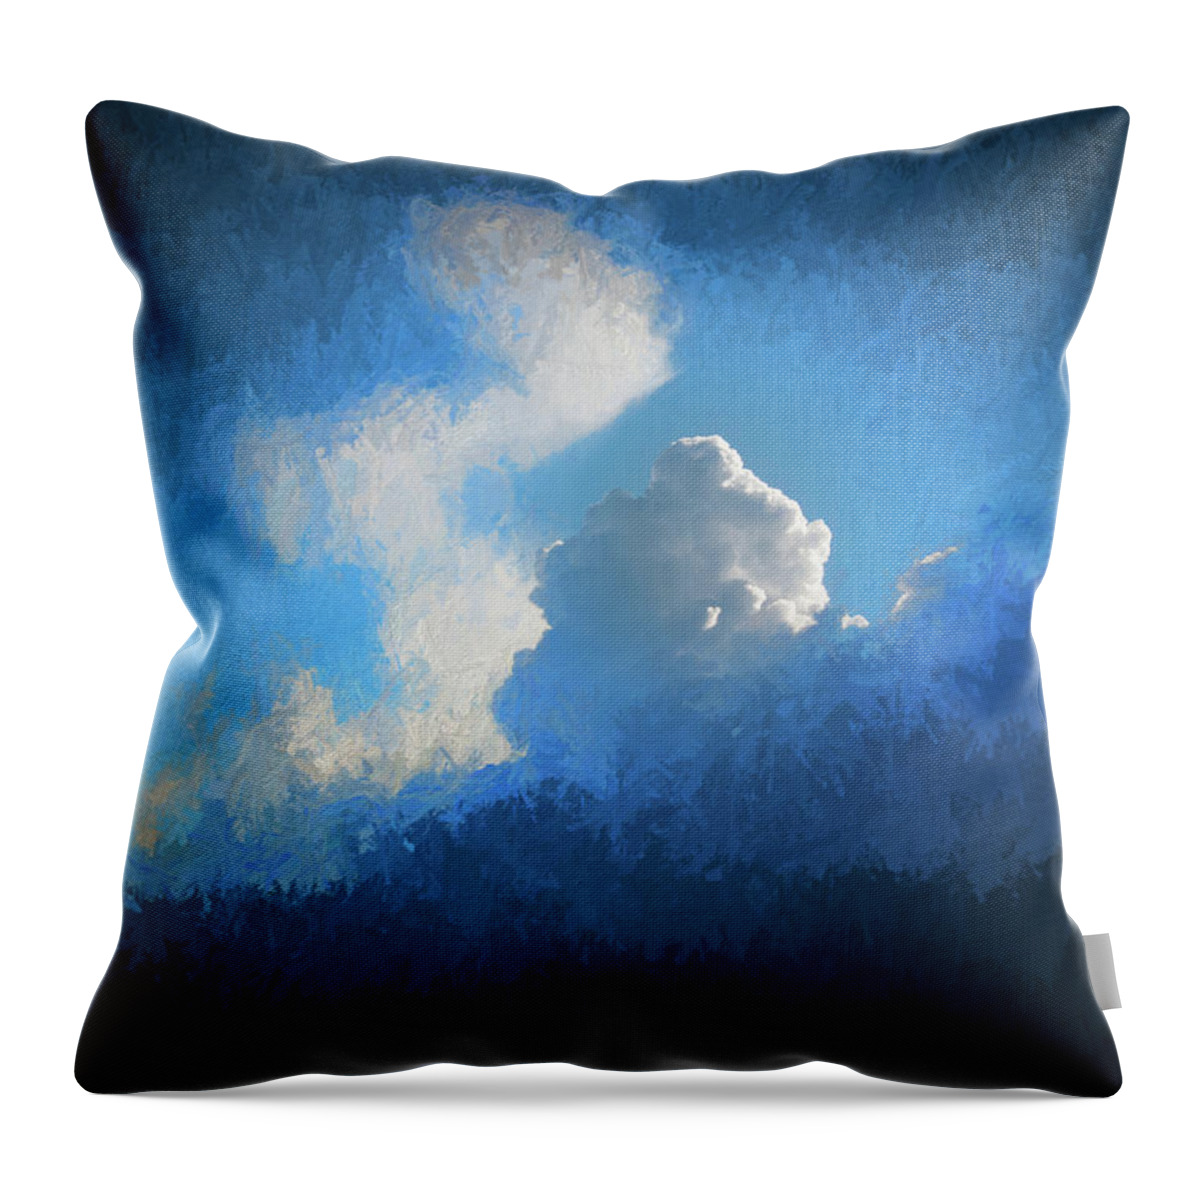 Clouds Throw Pillow featuring the photograph Big Sky by Richard Goldman